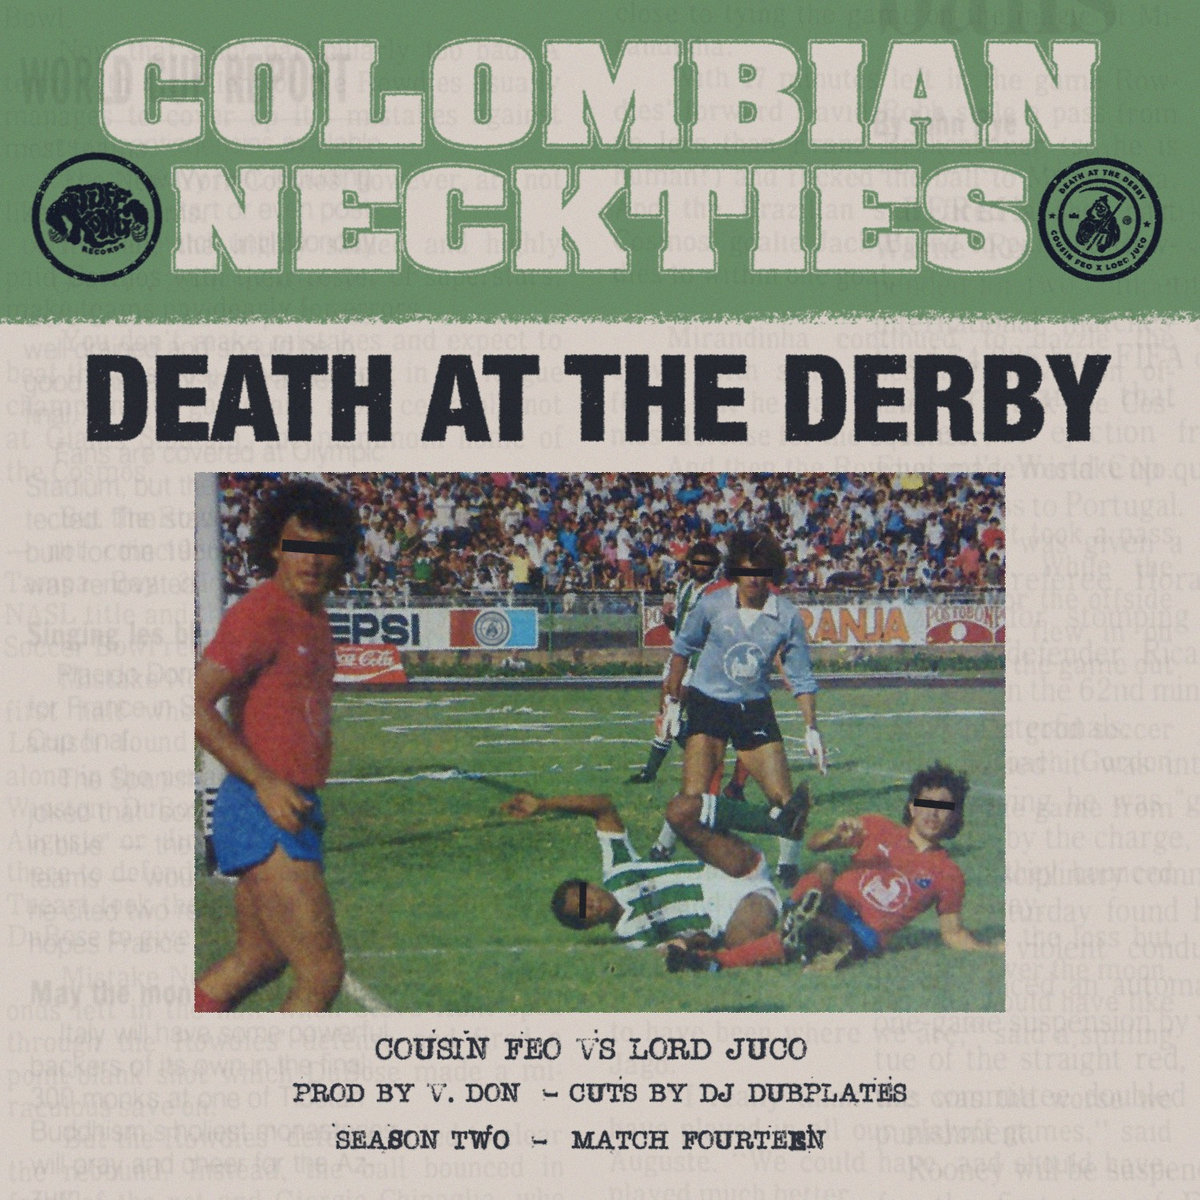 Colombian_neckties_death_at_the_derby